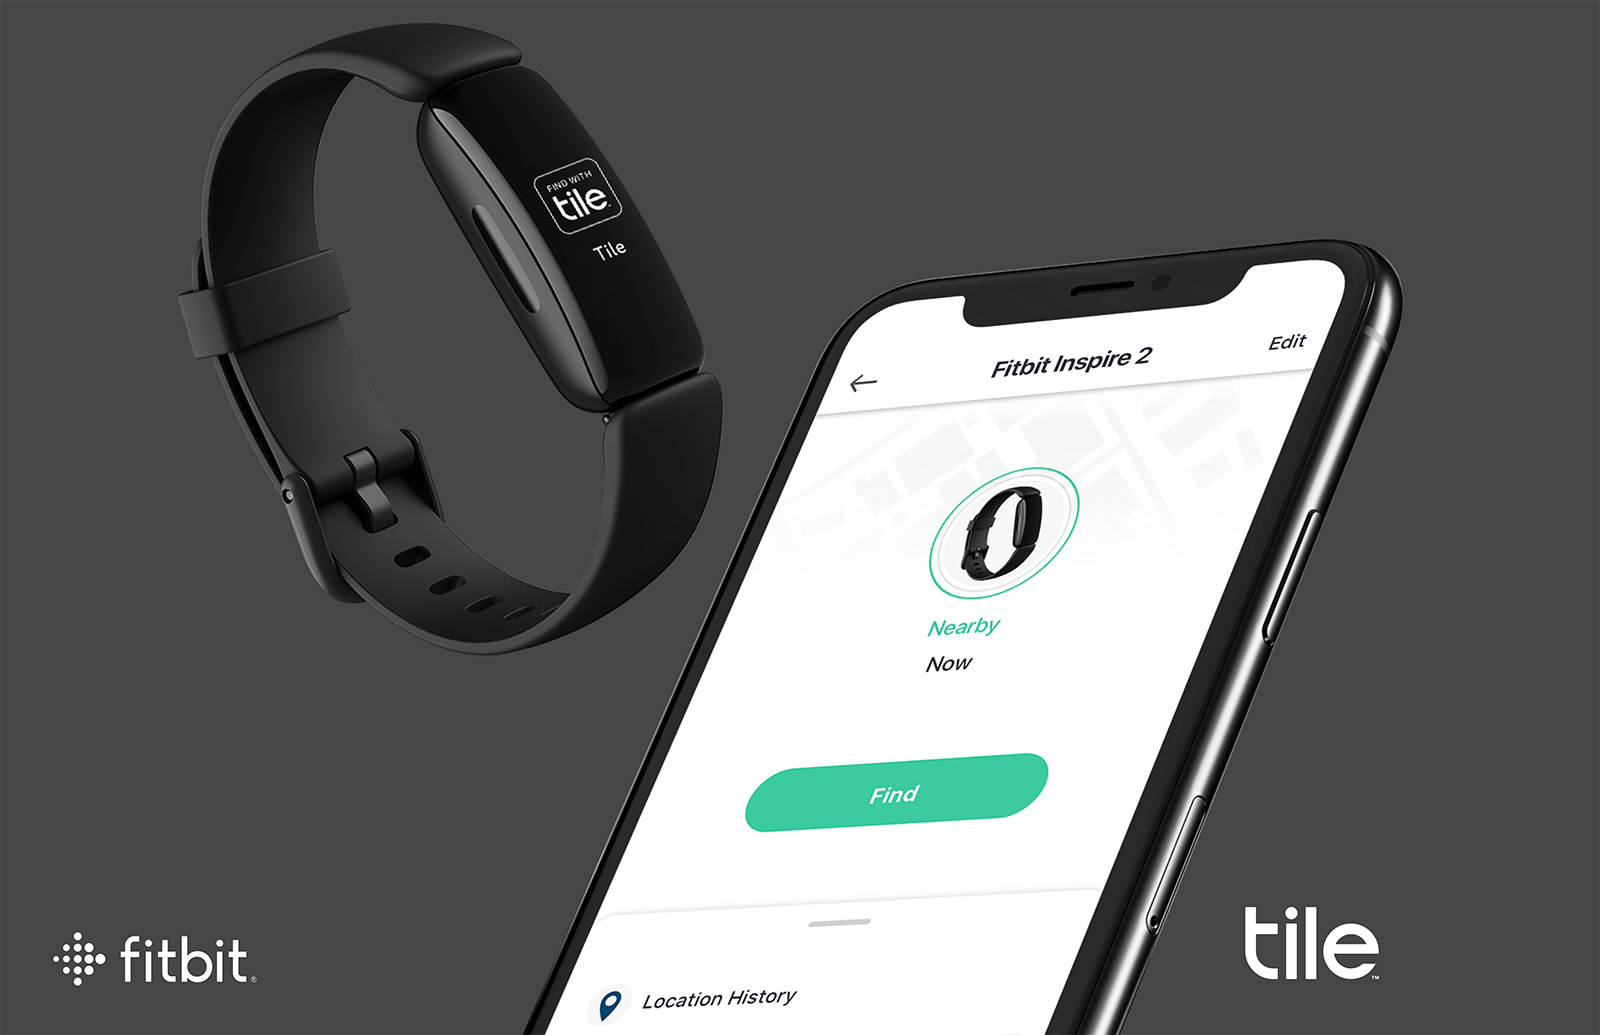 Fitbit Inspire 2 with Tile